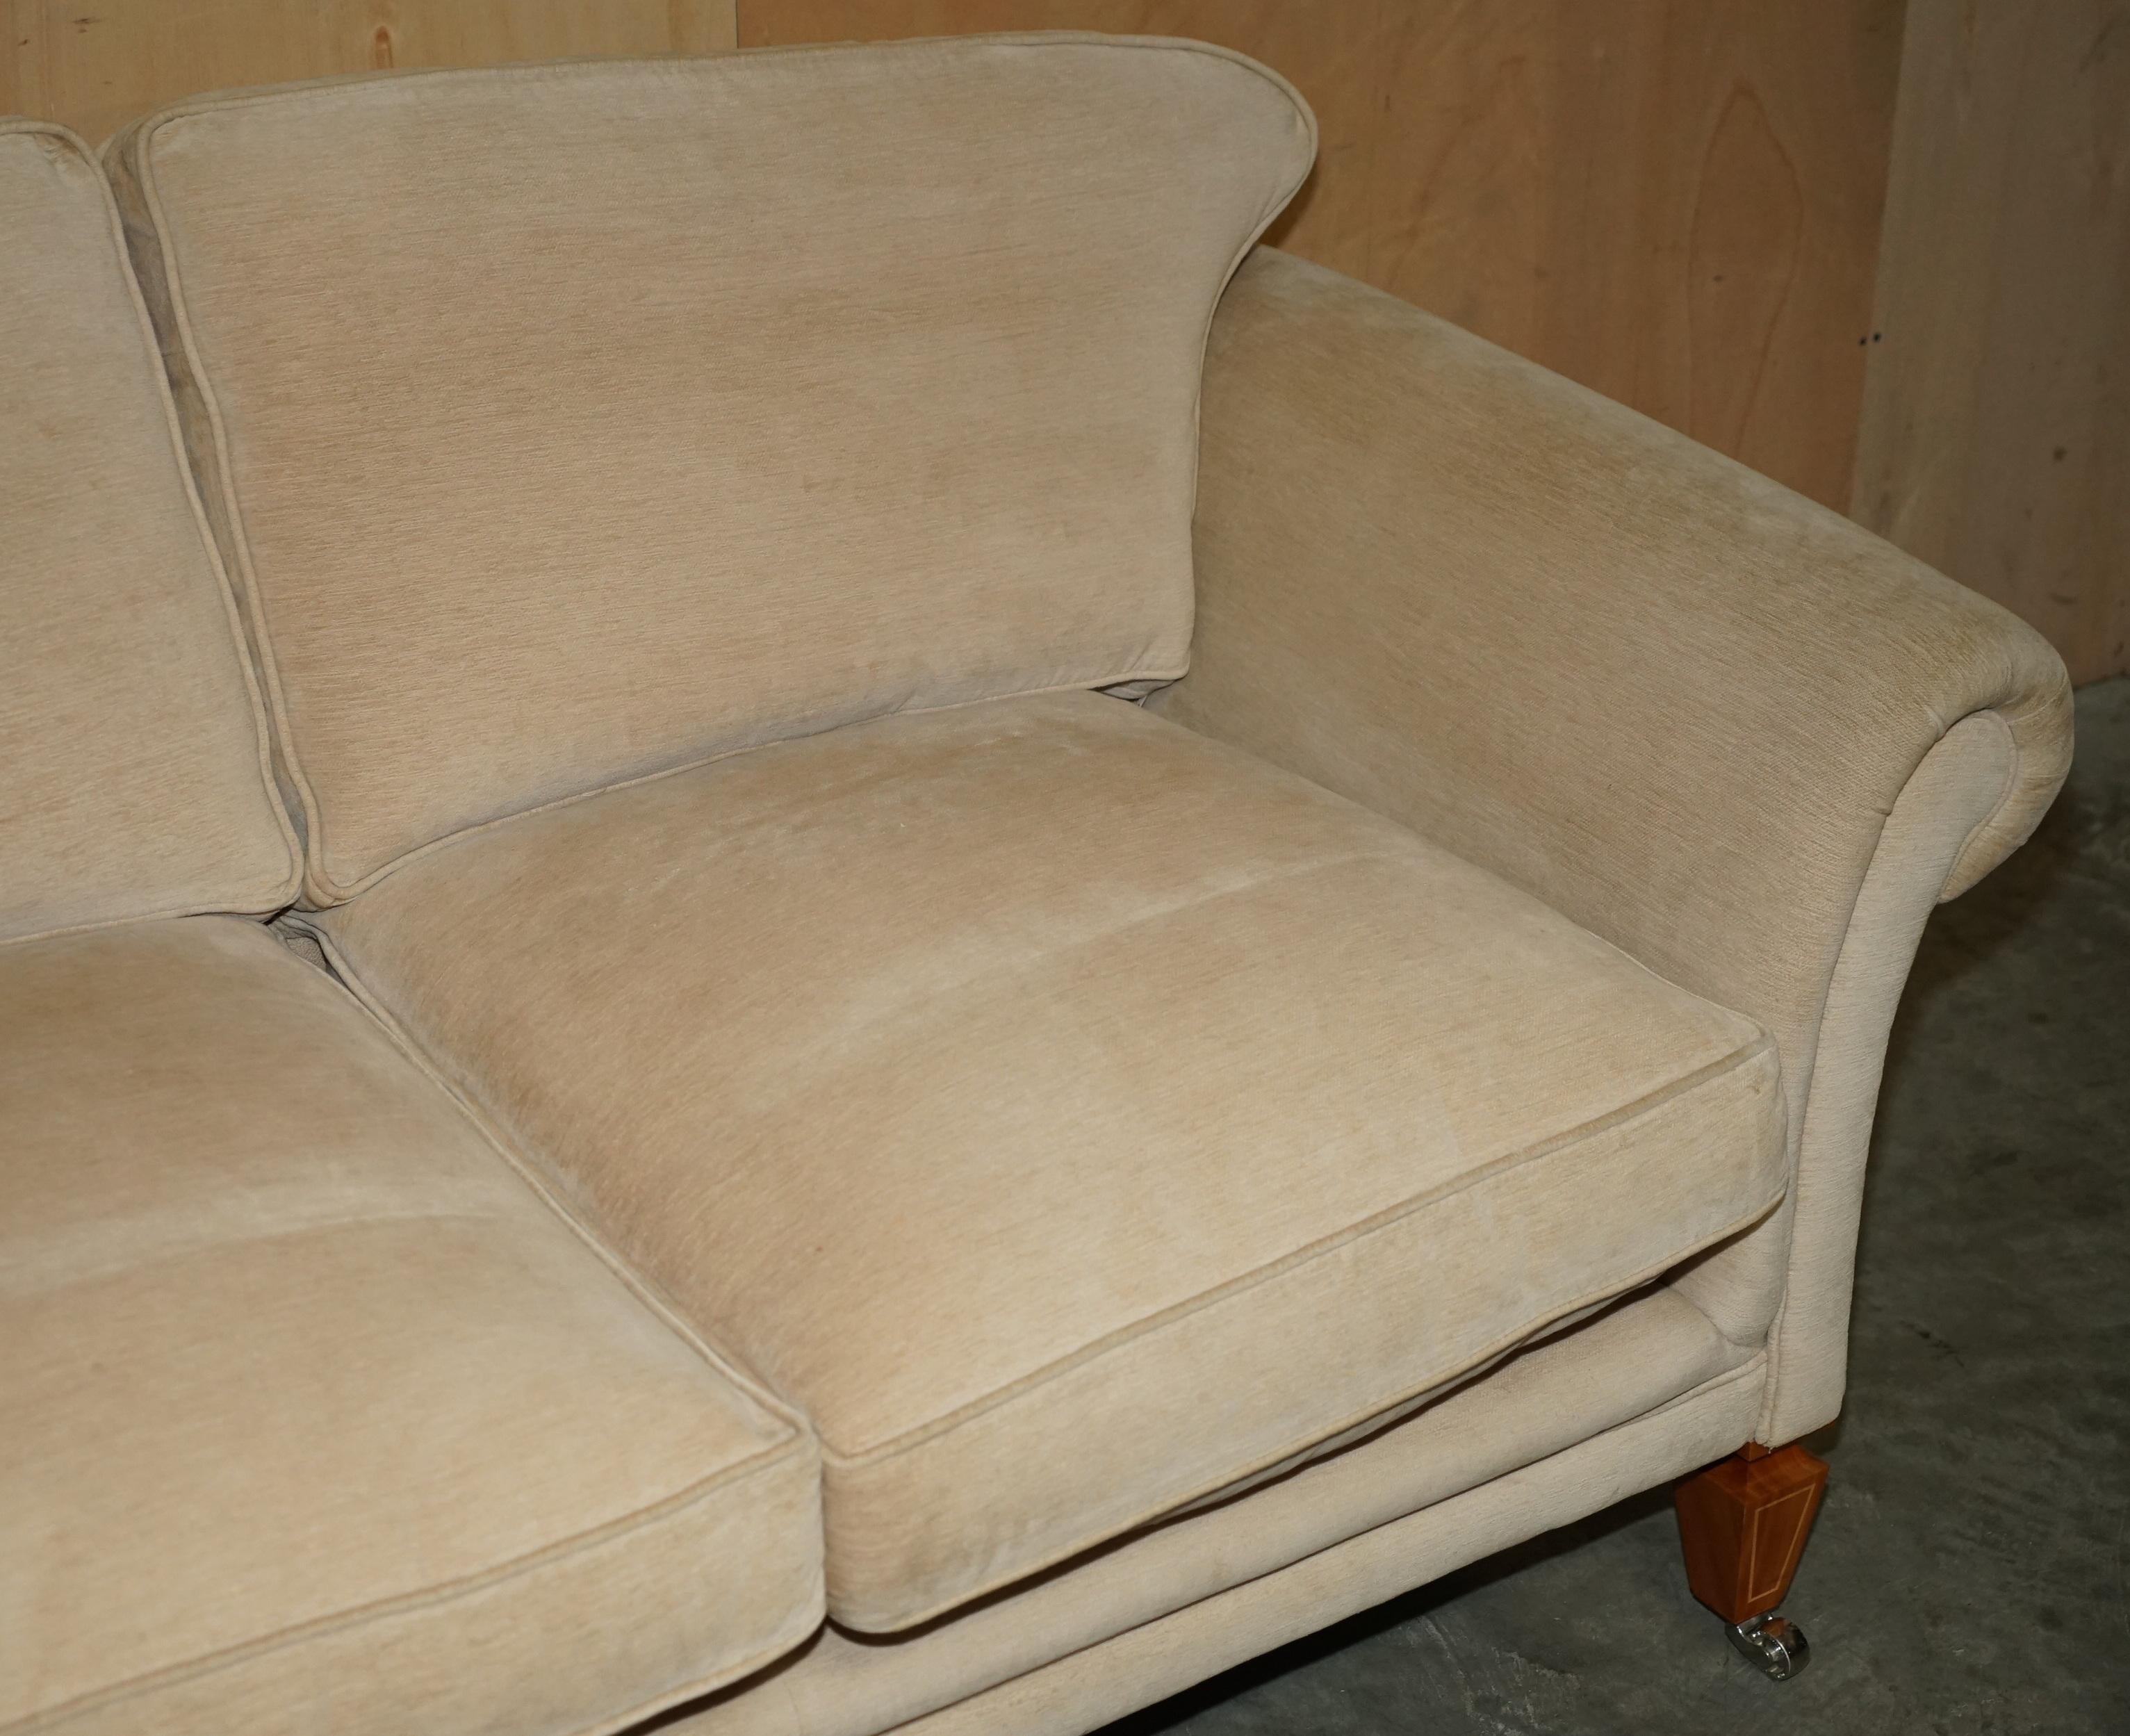 EXQUISITE VISCOUNT DAVID LINLEY TWO SEAT SOFA WiTH STAMPED CASTORS For Sale 3